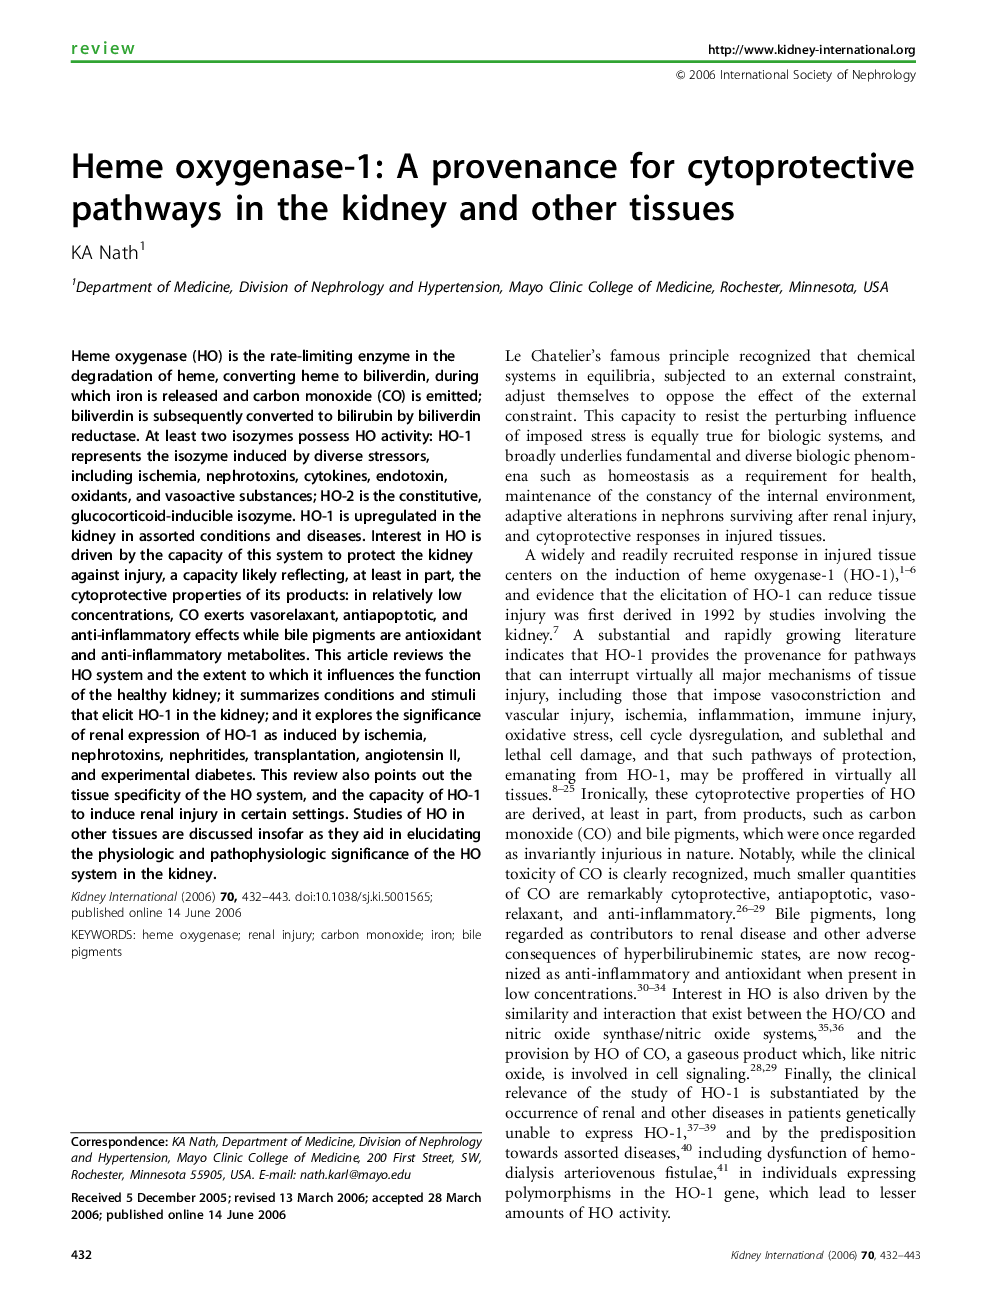 Heme oxygenase-1: A provenance for cytoprotective pathways in the kidney and other tissues